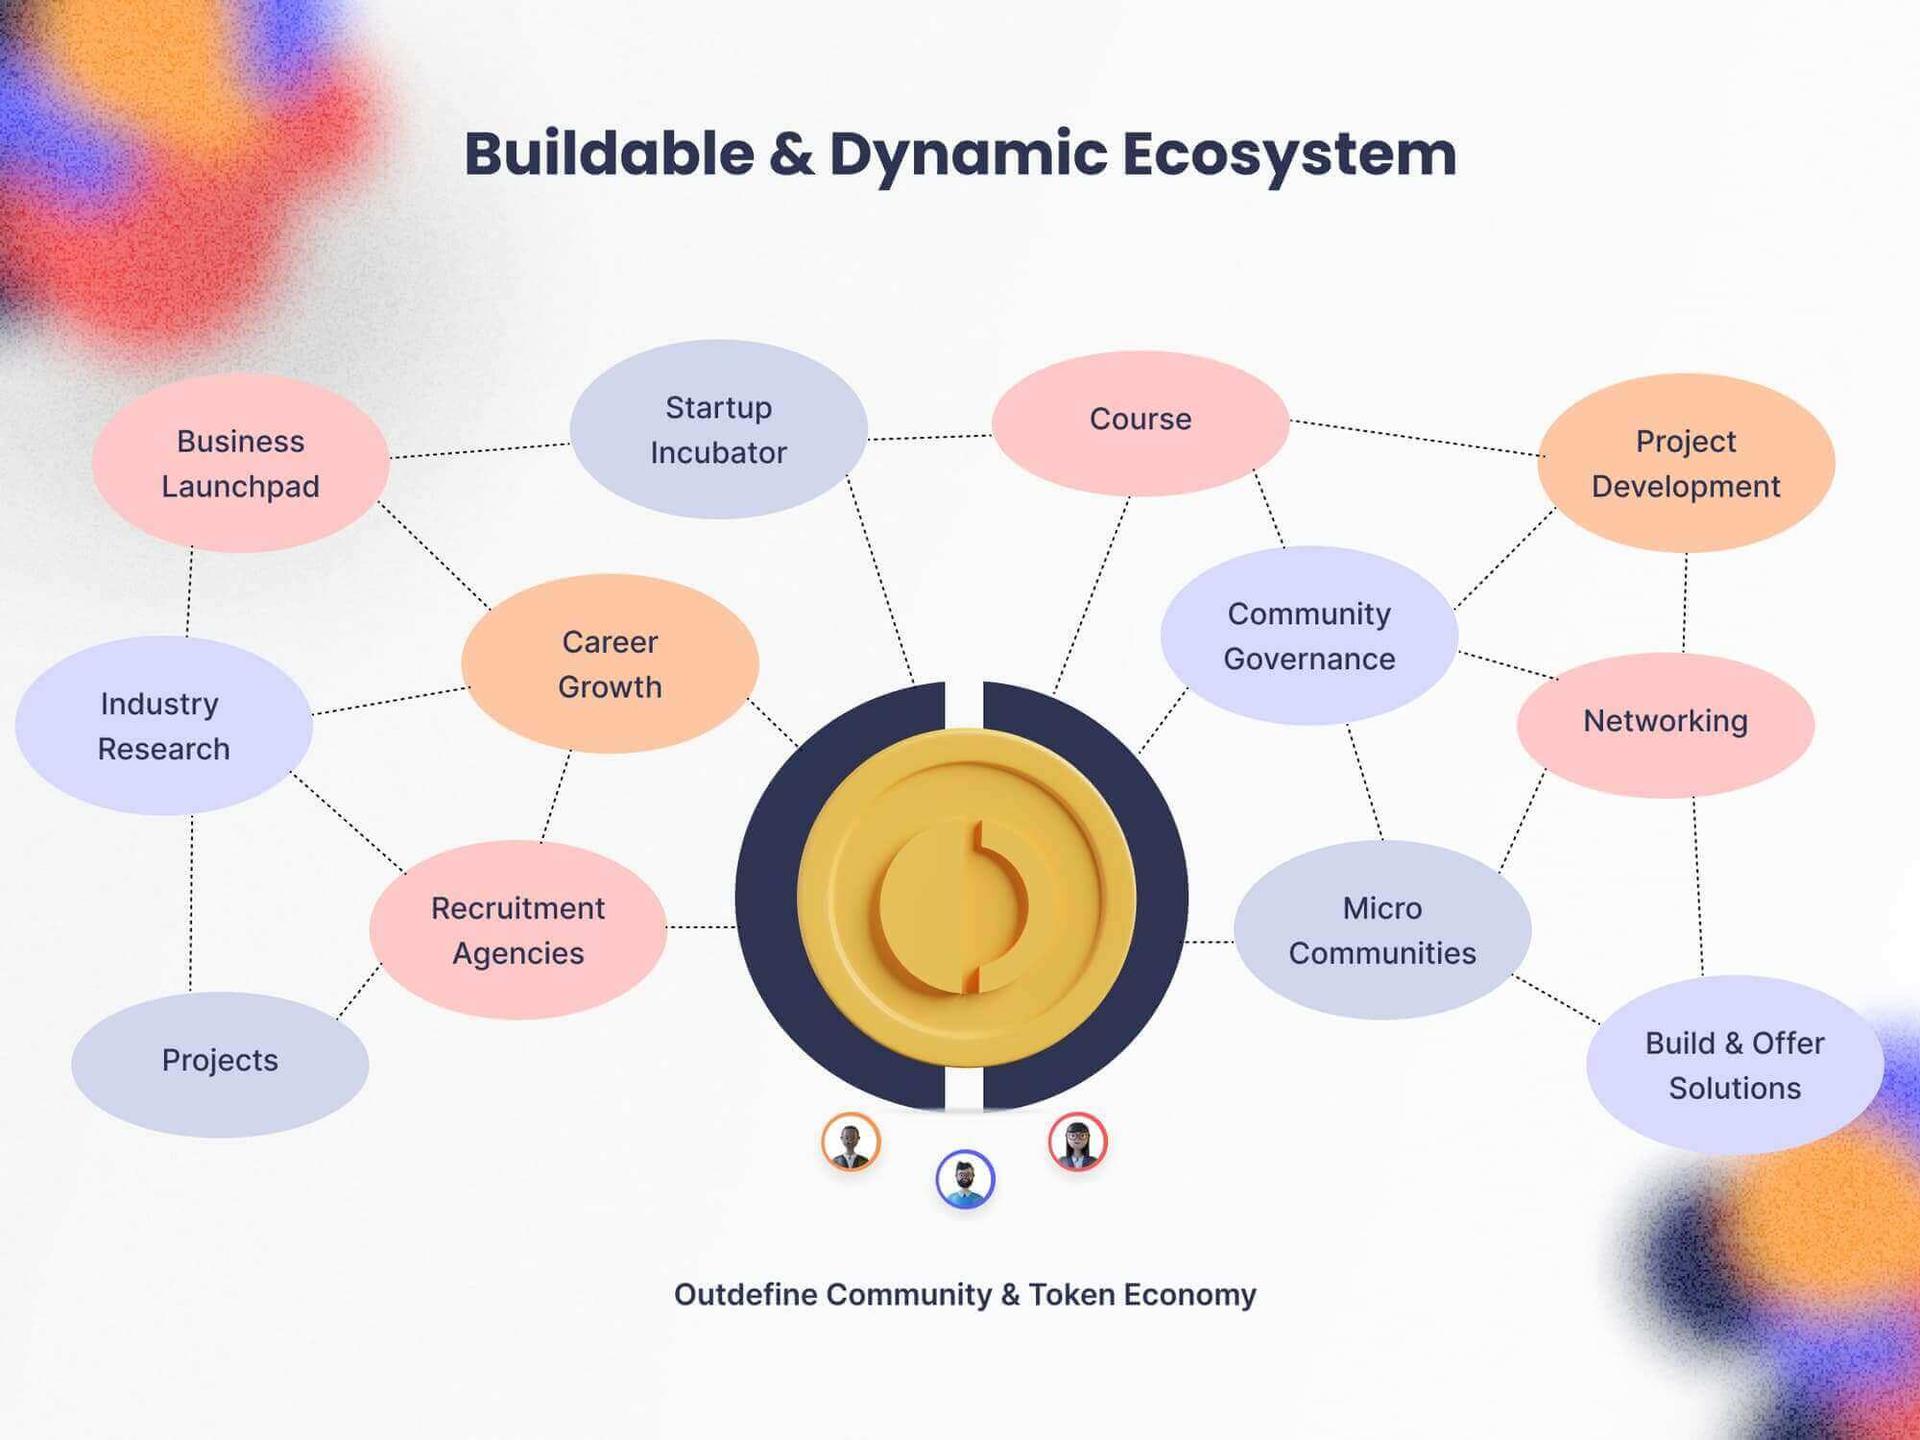 A visual display of the decentralized Outdefine community and token economy including recruitment agencies, community governance, web3 projects, web3 development, and web3 solutions.